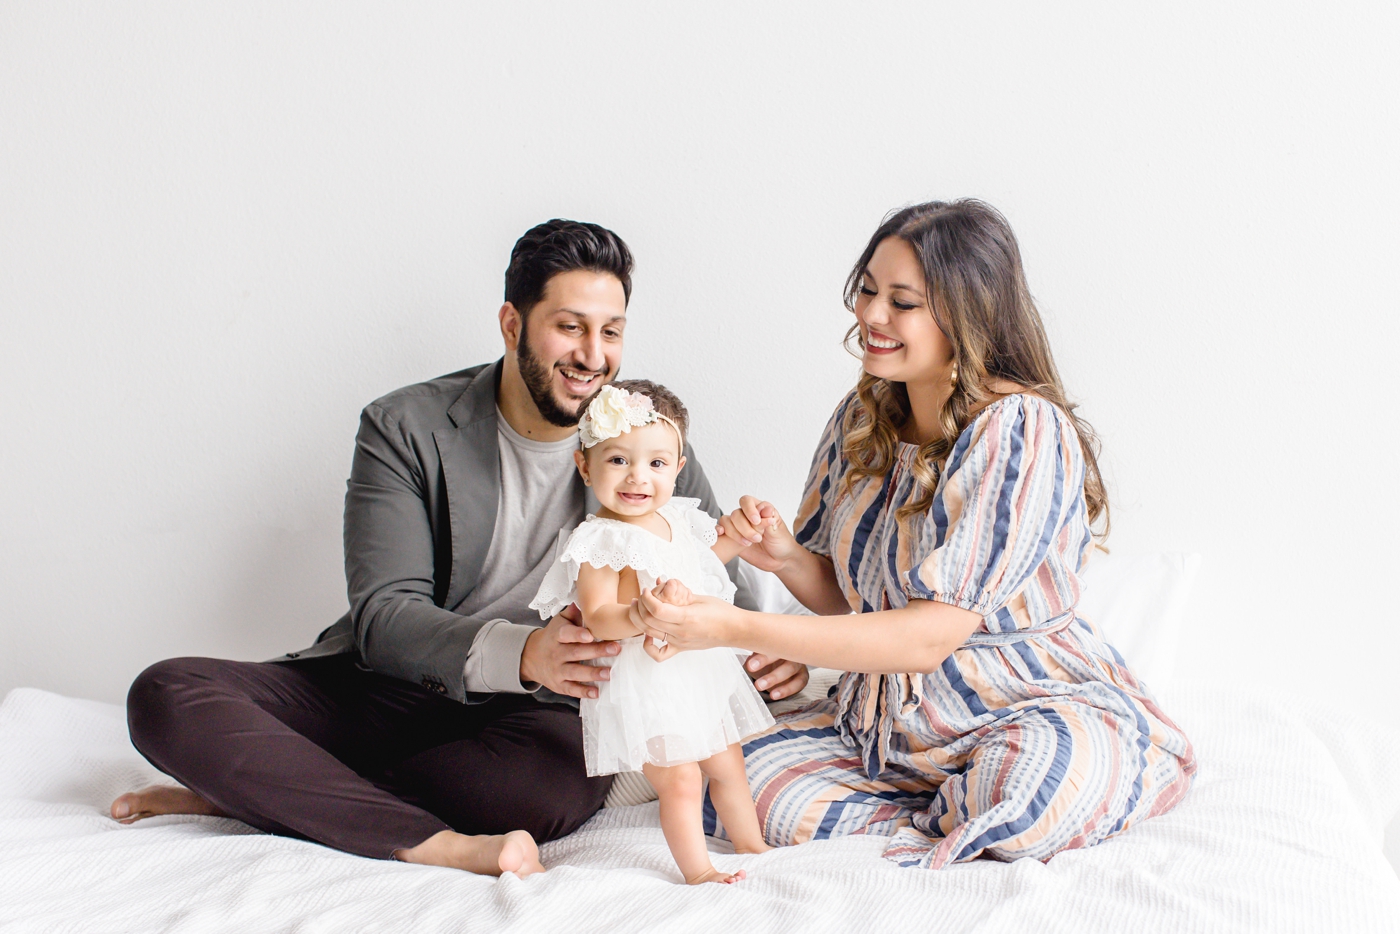 Baby girl smiling with parents during milestone photoshoot in studio. Photo by Cedar Park family photographer, Sana Ahmed Photography.